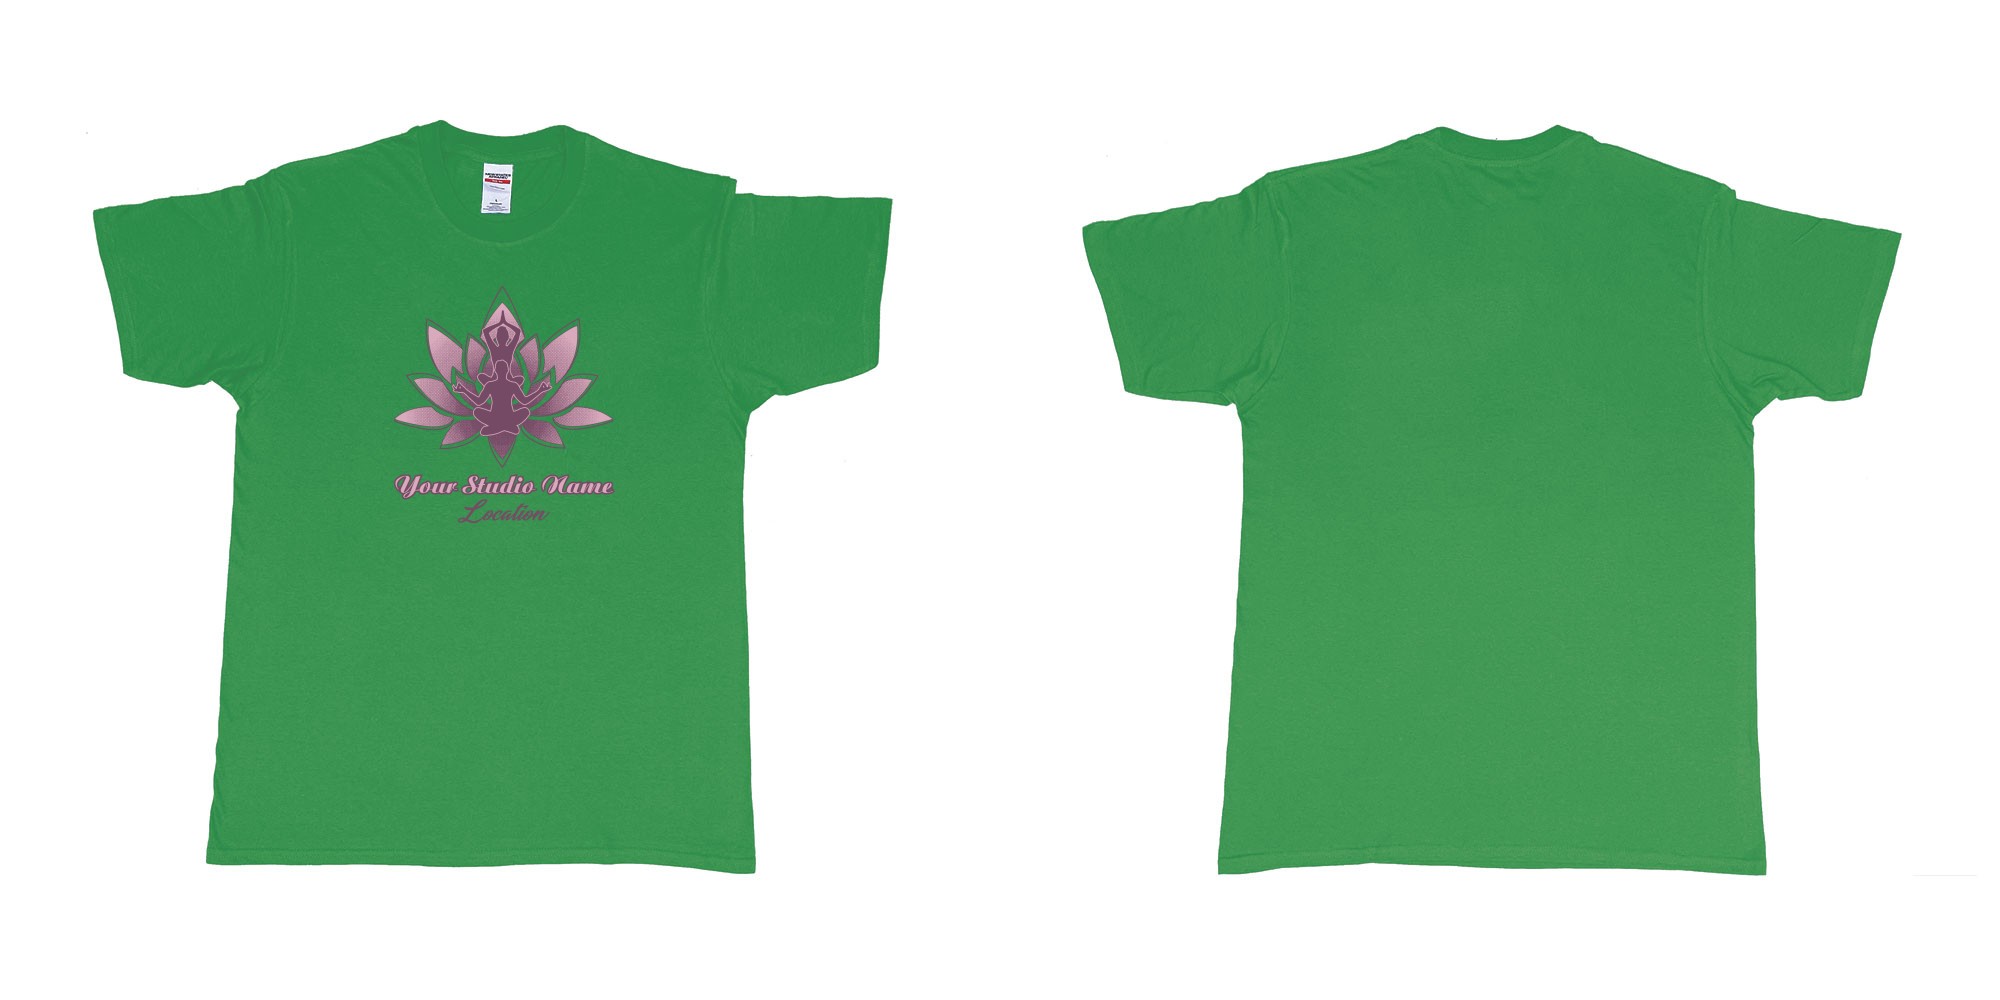 Custom tshirt design yoga meditation lotus own studio t shirt screen printing bali in fabric color irish-green choice your own text made in Bali by The Pirate Way